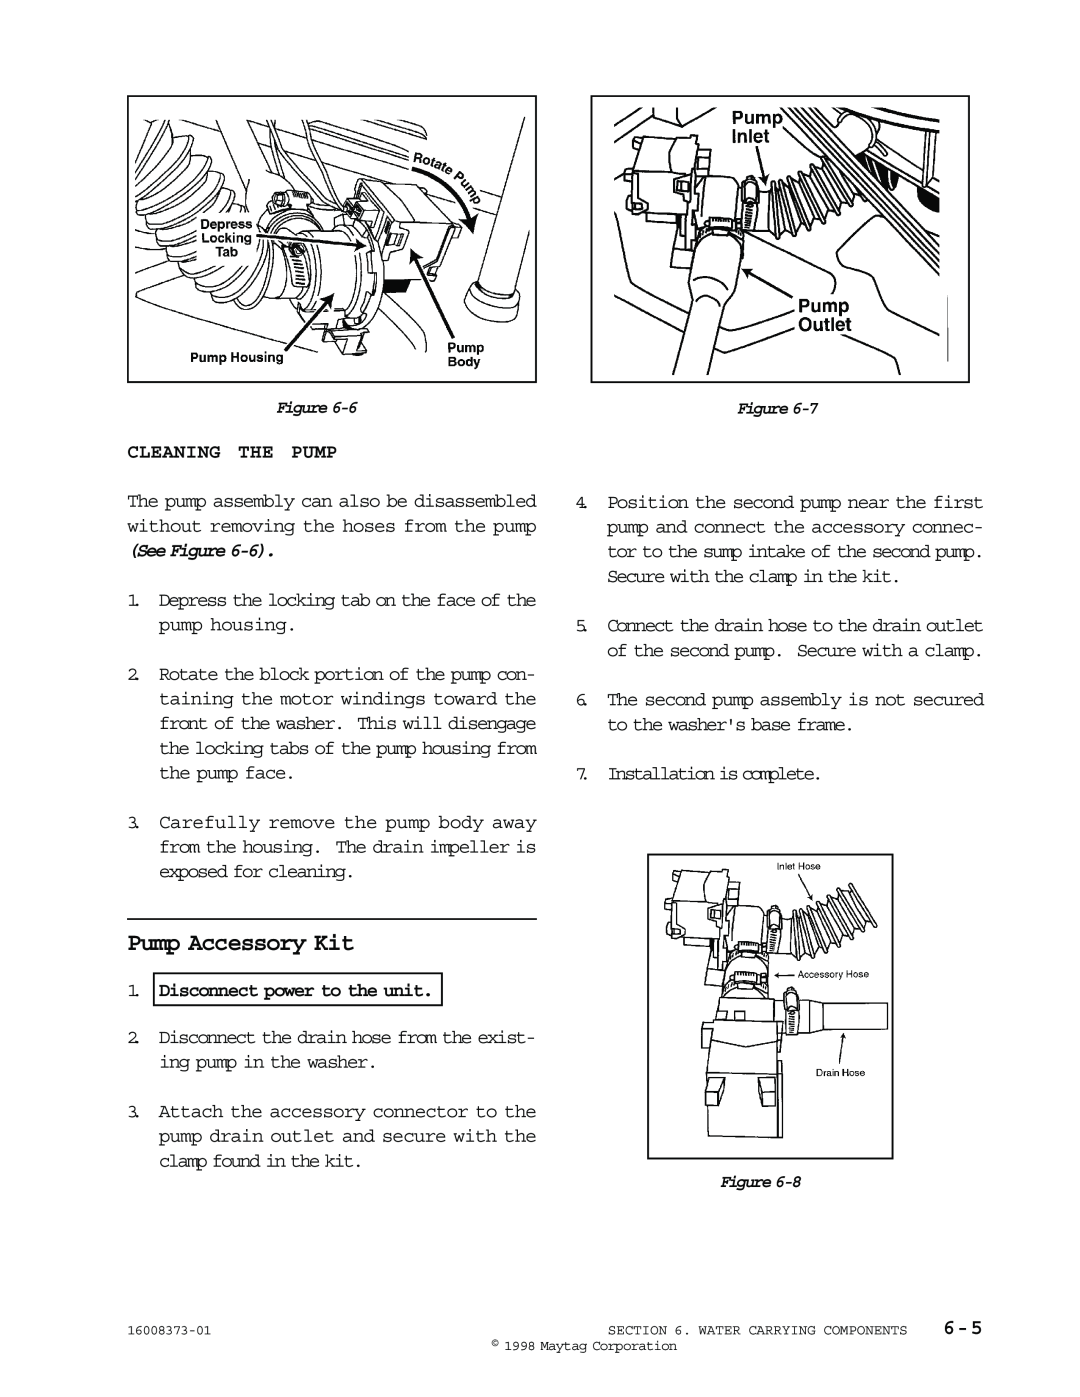 Whirlpool MAH3000 service manual Pump Accessory Kit, Cleaning The Pump, See Figure, Disconnect power to the unit 